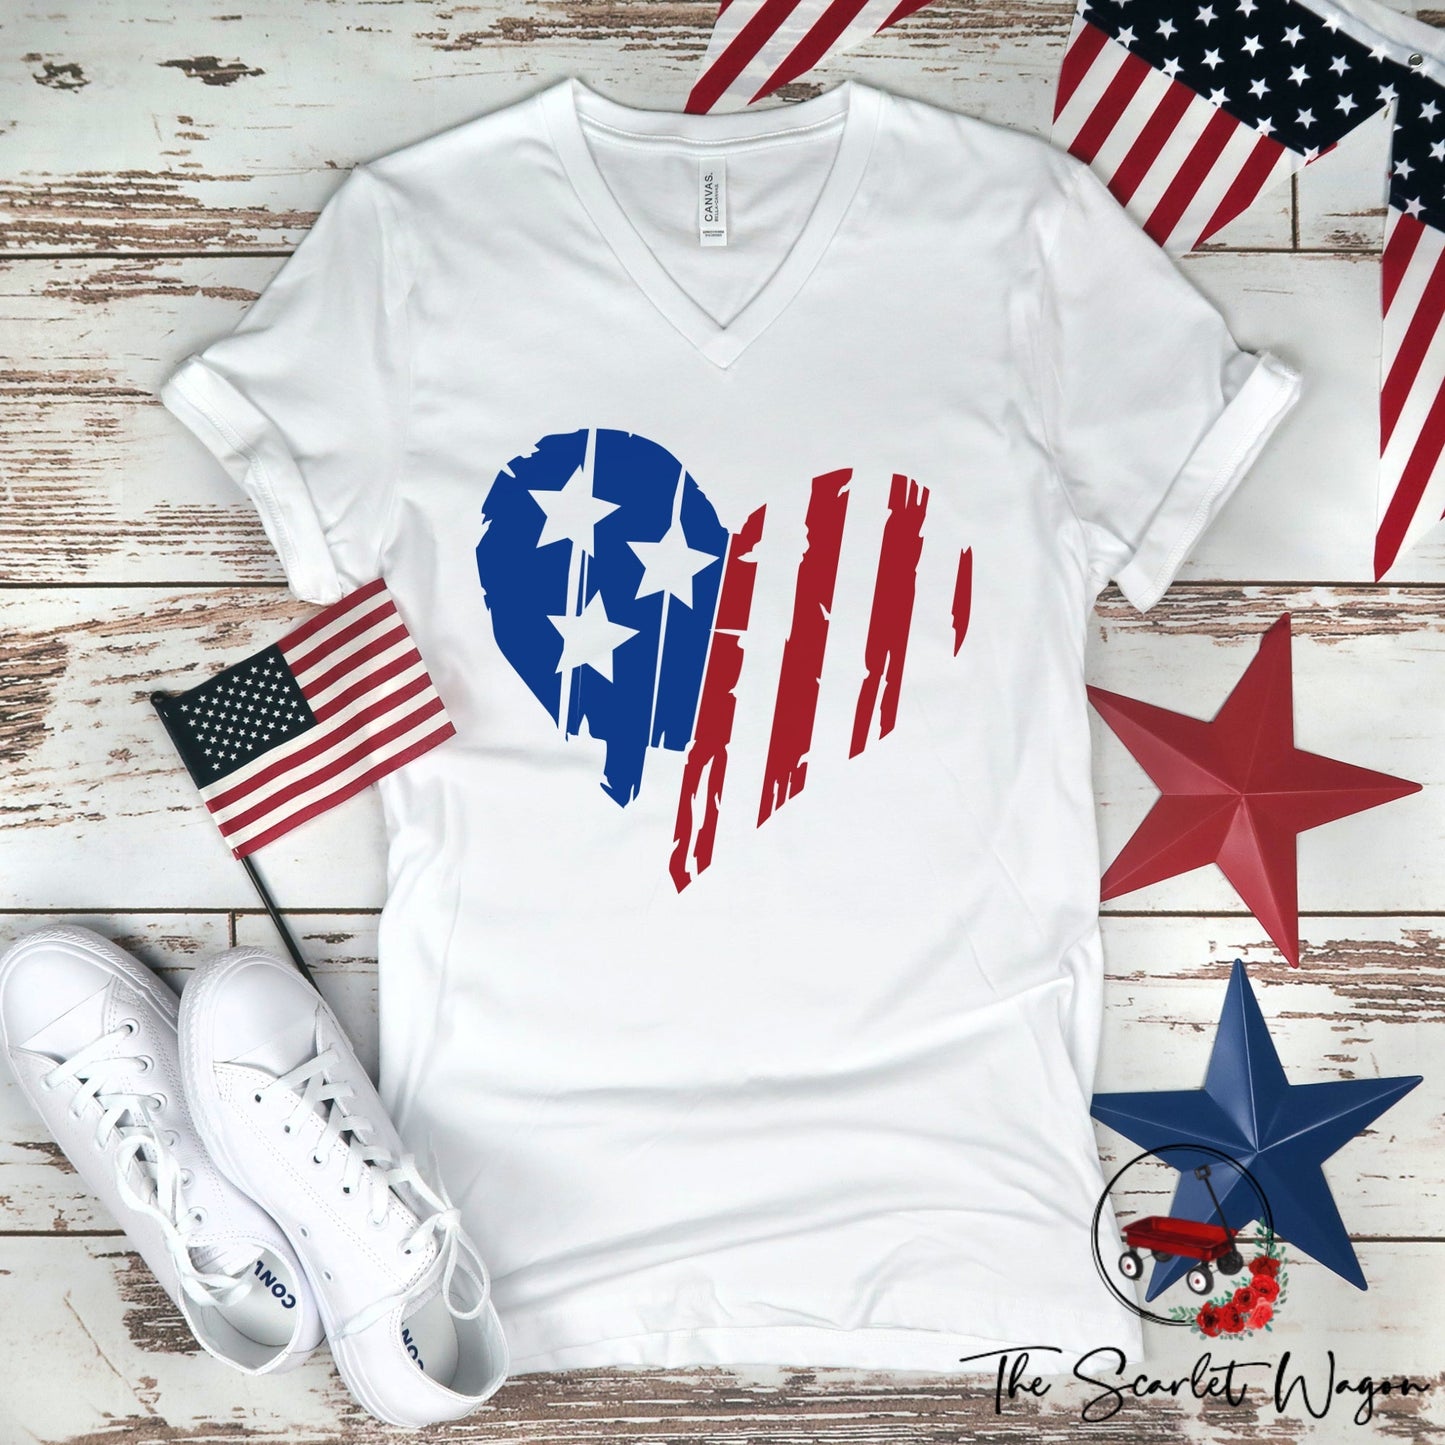 Distressed Heart-Shaped Flag Unisex V-Neck Patriotic Shirt The Scarlet Wagon Boutique White XS 